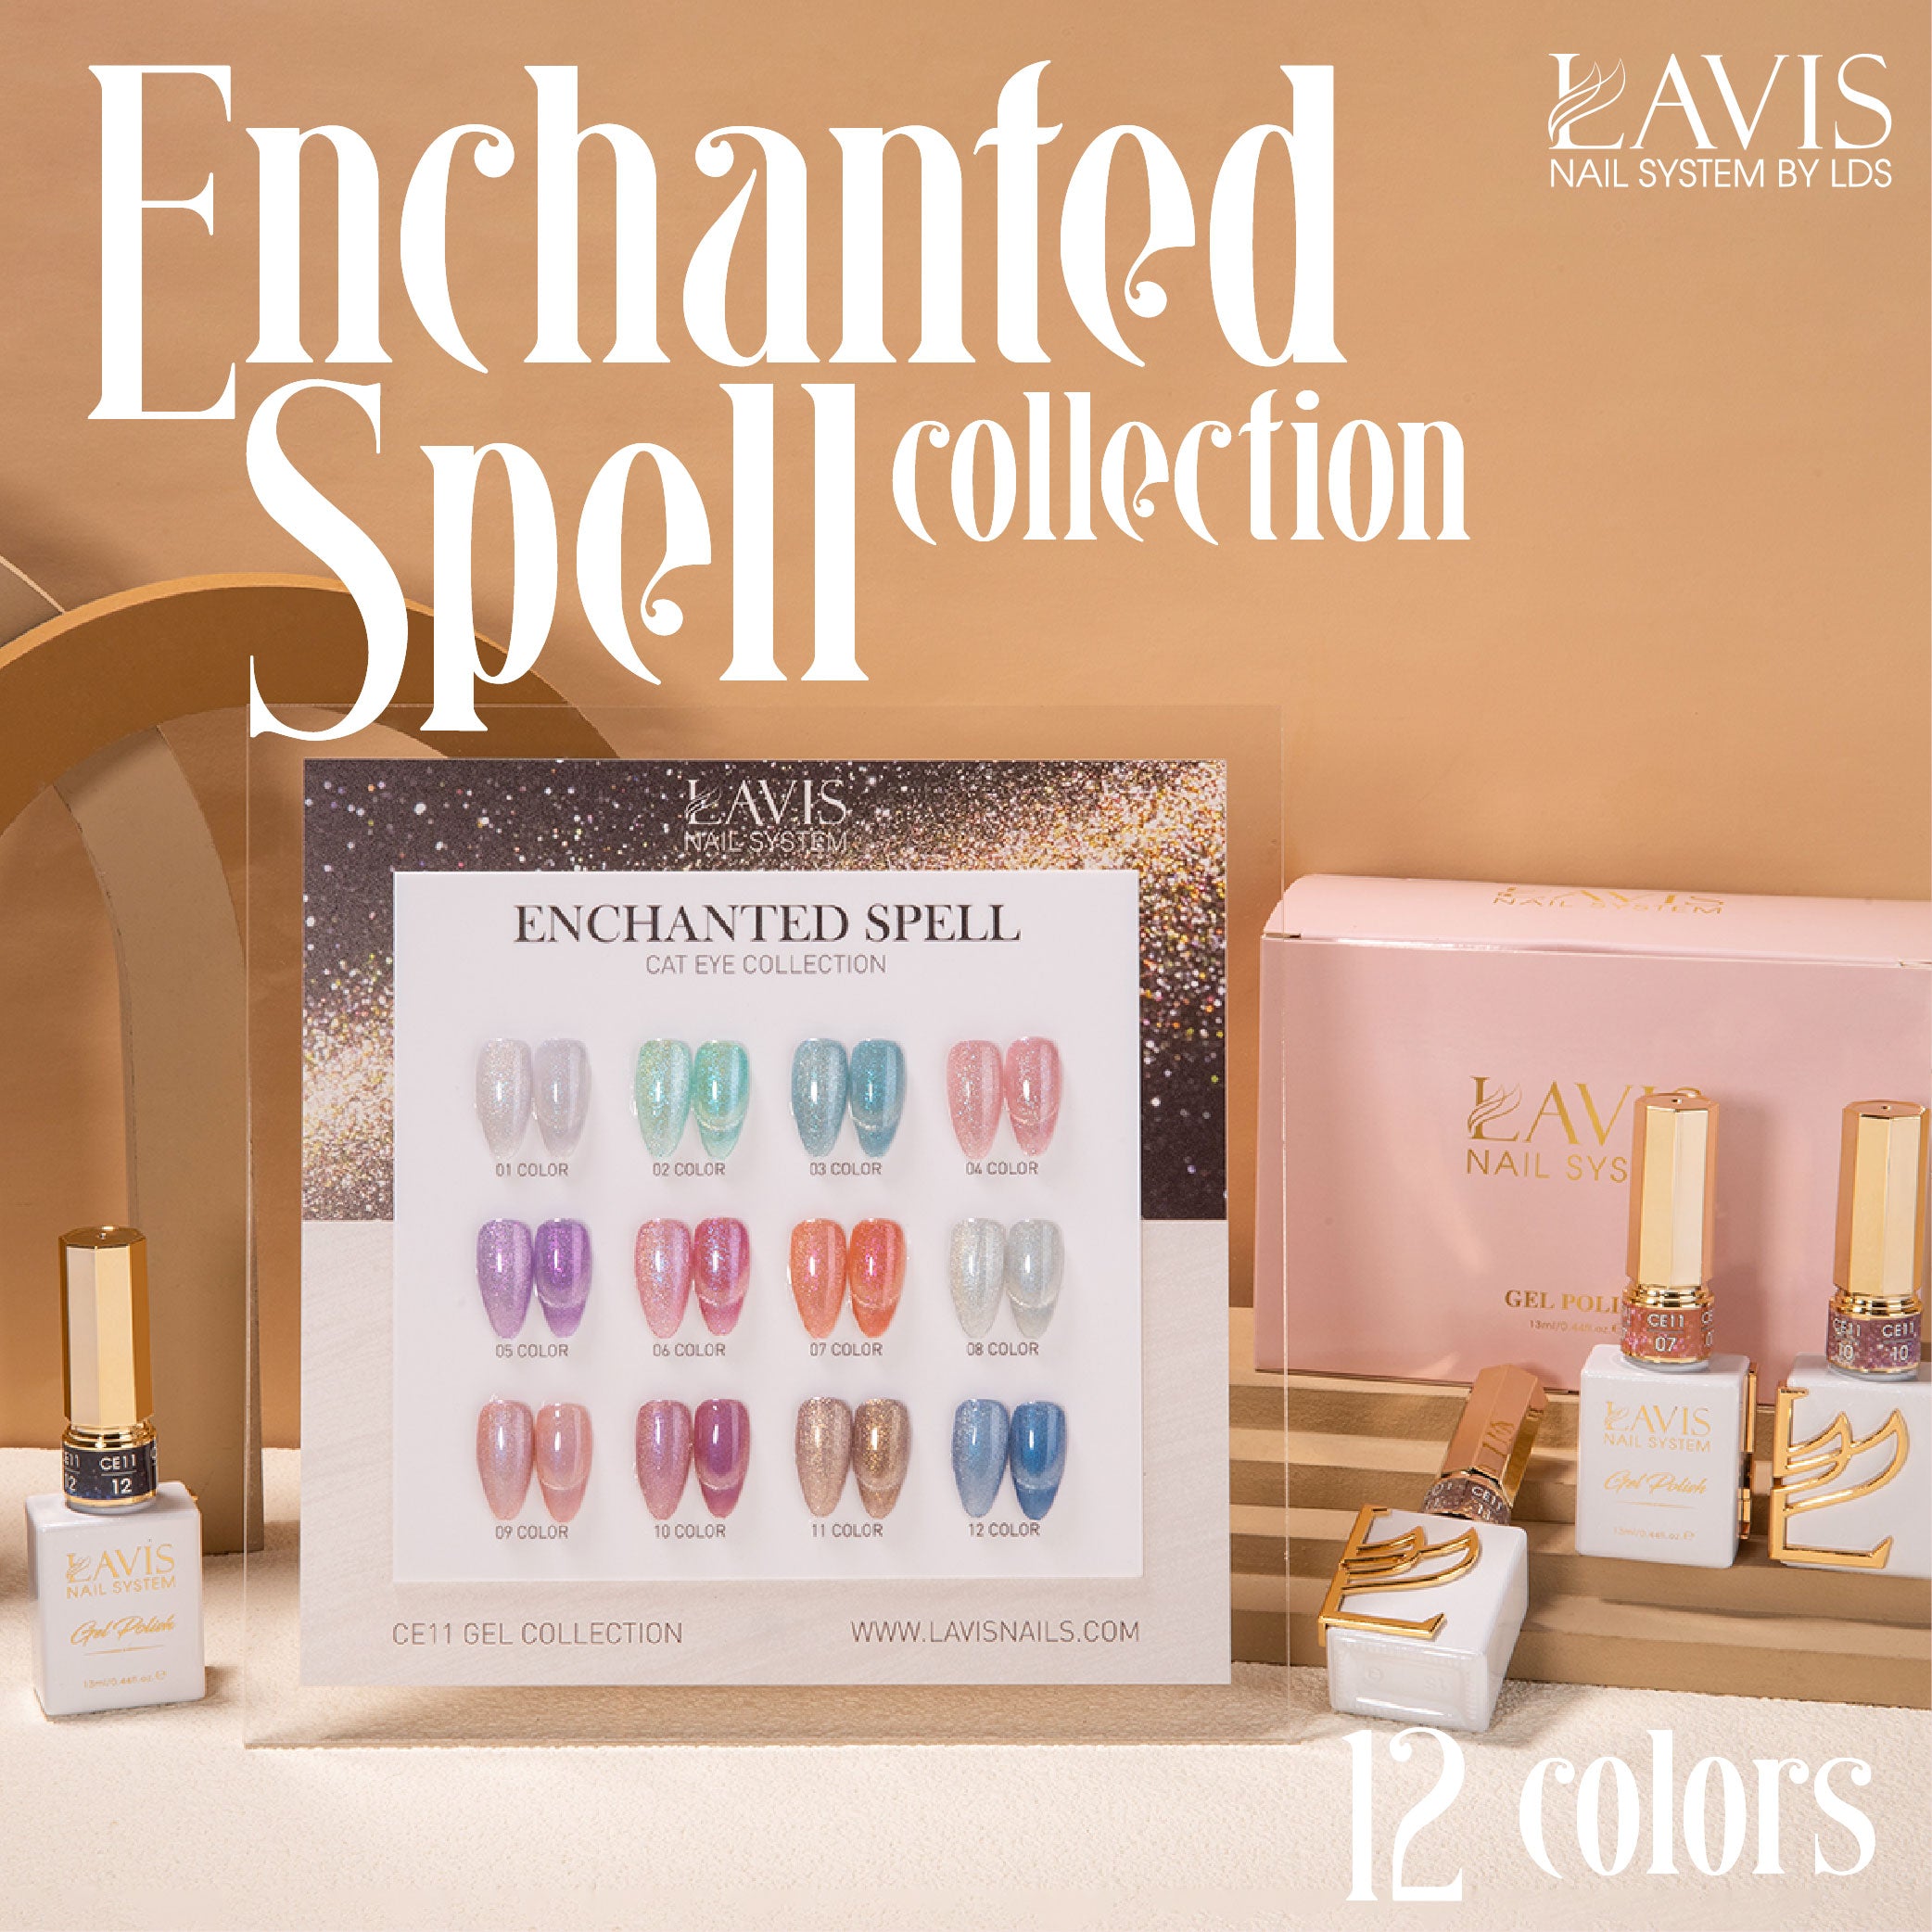 LAVIS Cat Eyes CE11 - 08 - Gel Polish 0.5 oz - Enchanted Spell Collection